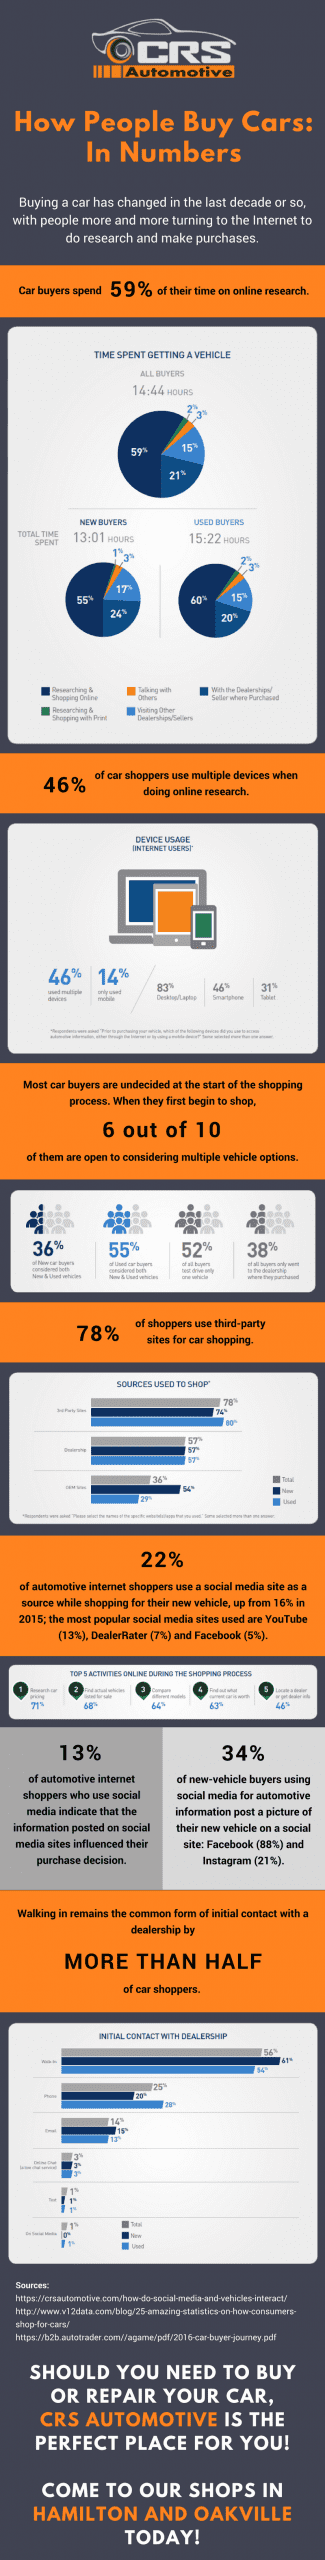 How People Buy Cars In Numbers INFOGRAPHIC